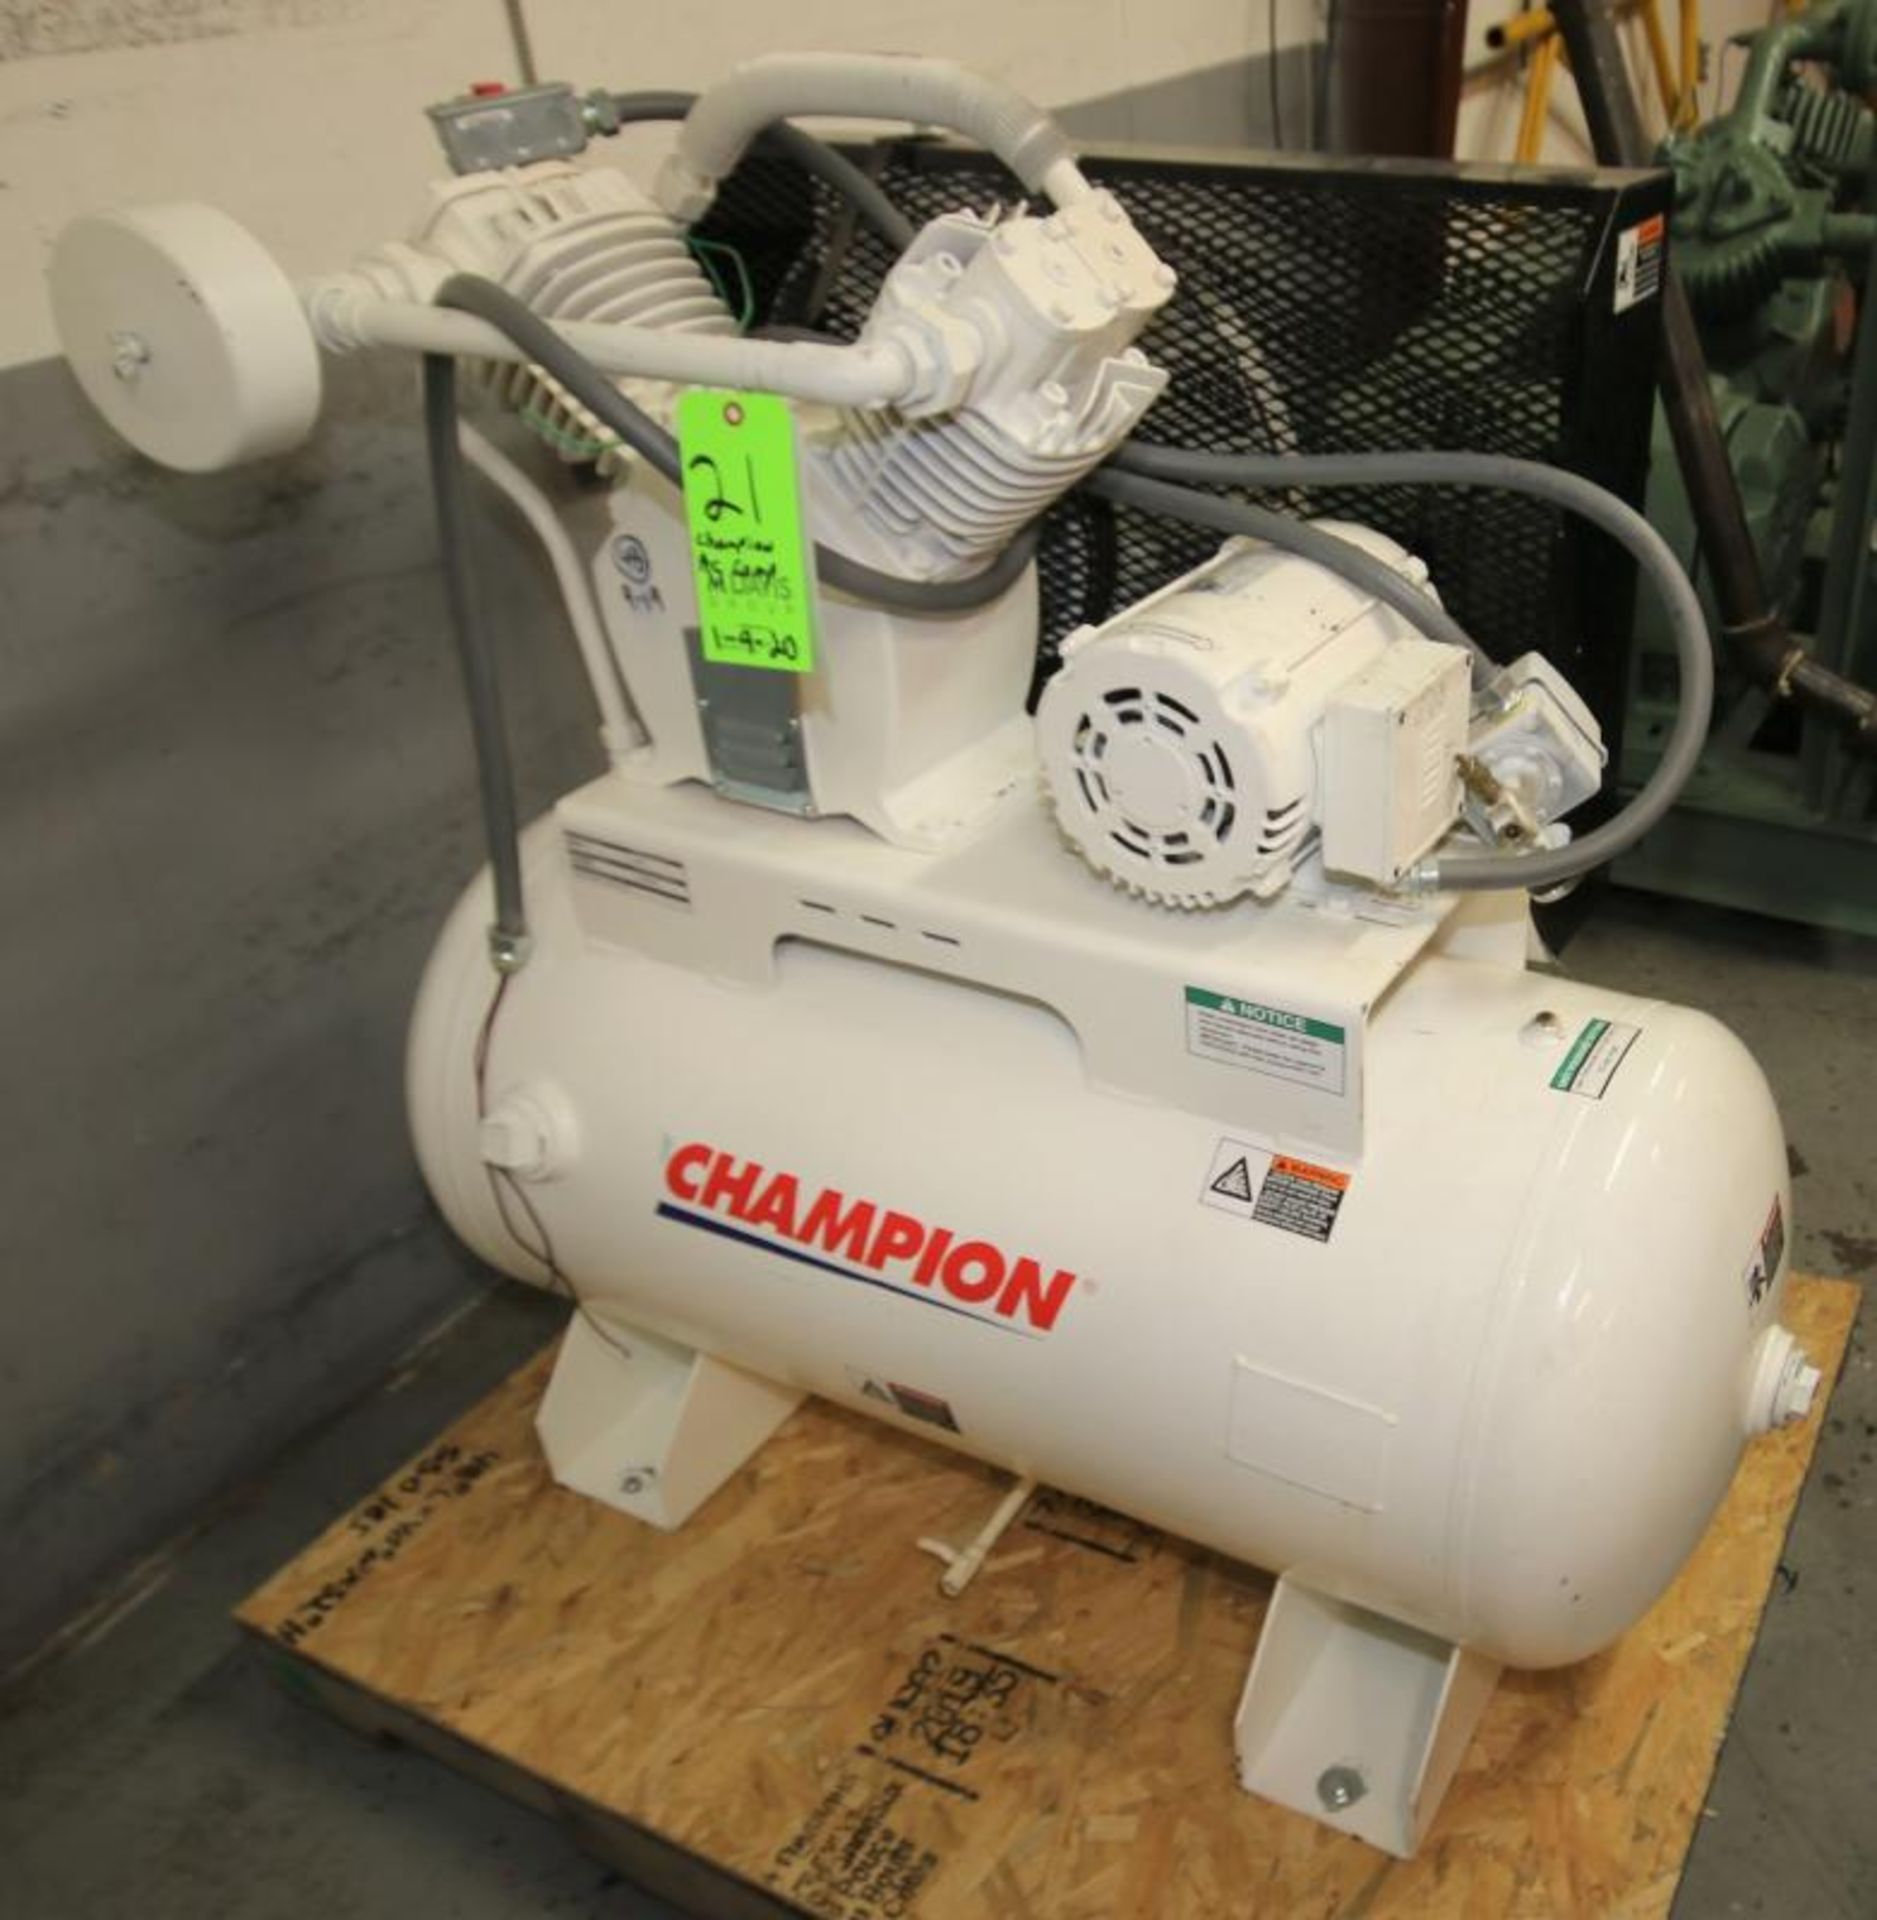 Champion 5 hp Reciprocating Air Compressor, Model H5MT011-6, SN D139320, Mounted on 42" L x 20" W